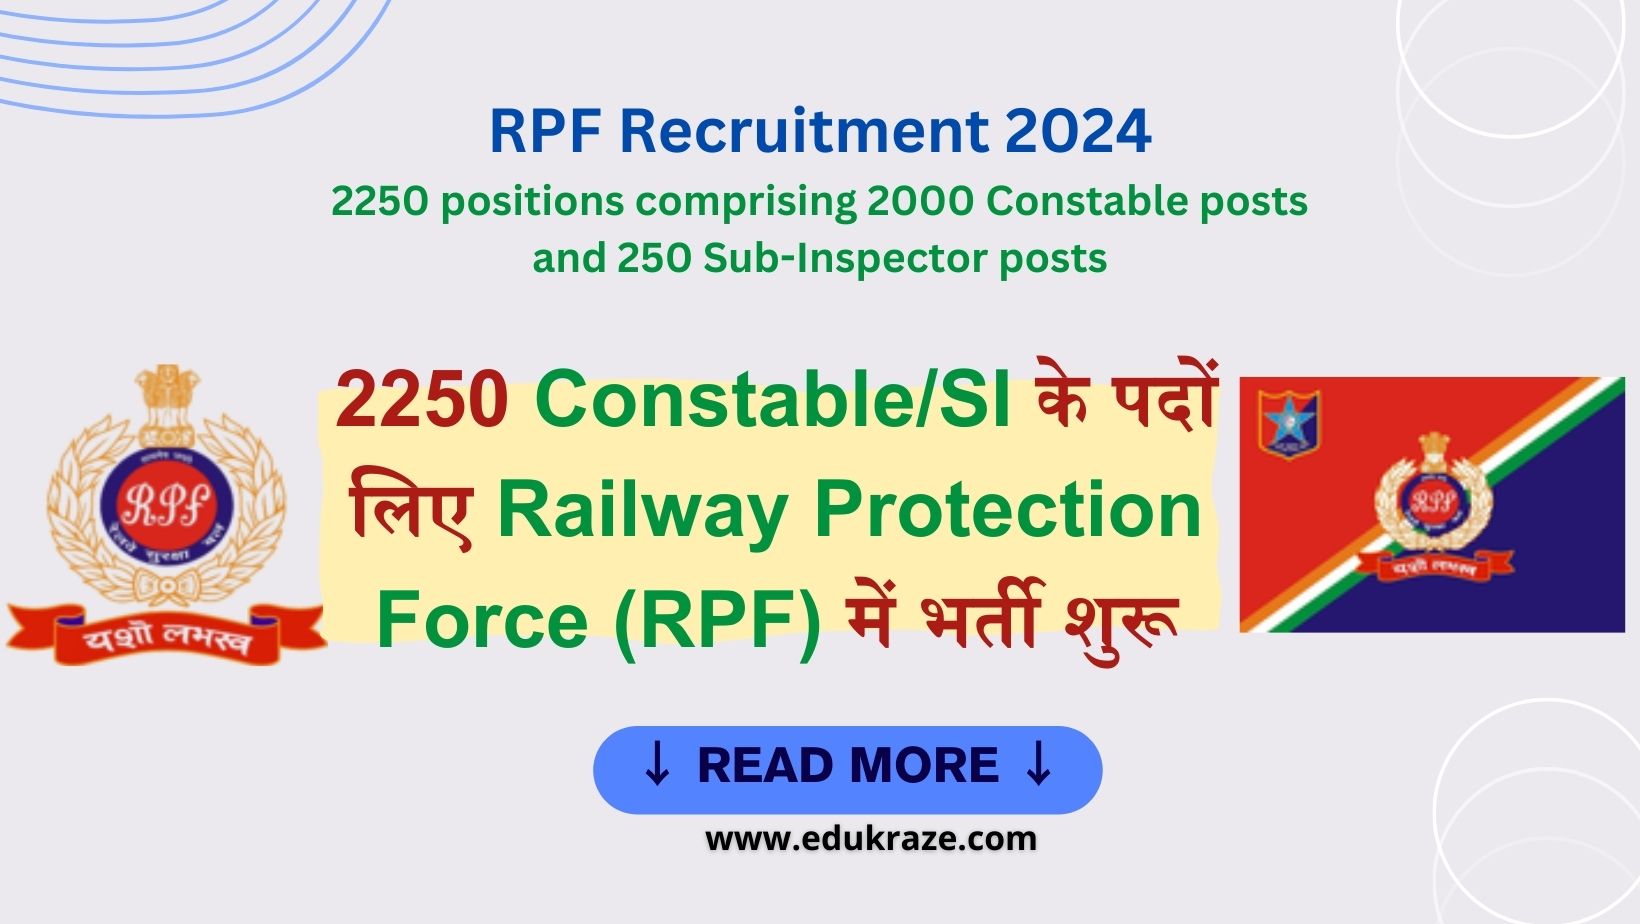 RPF Recruitment 2024 Out for 2250 Constable and SI Positions